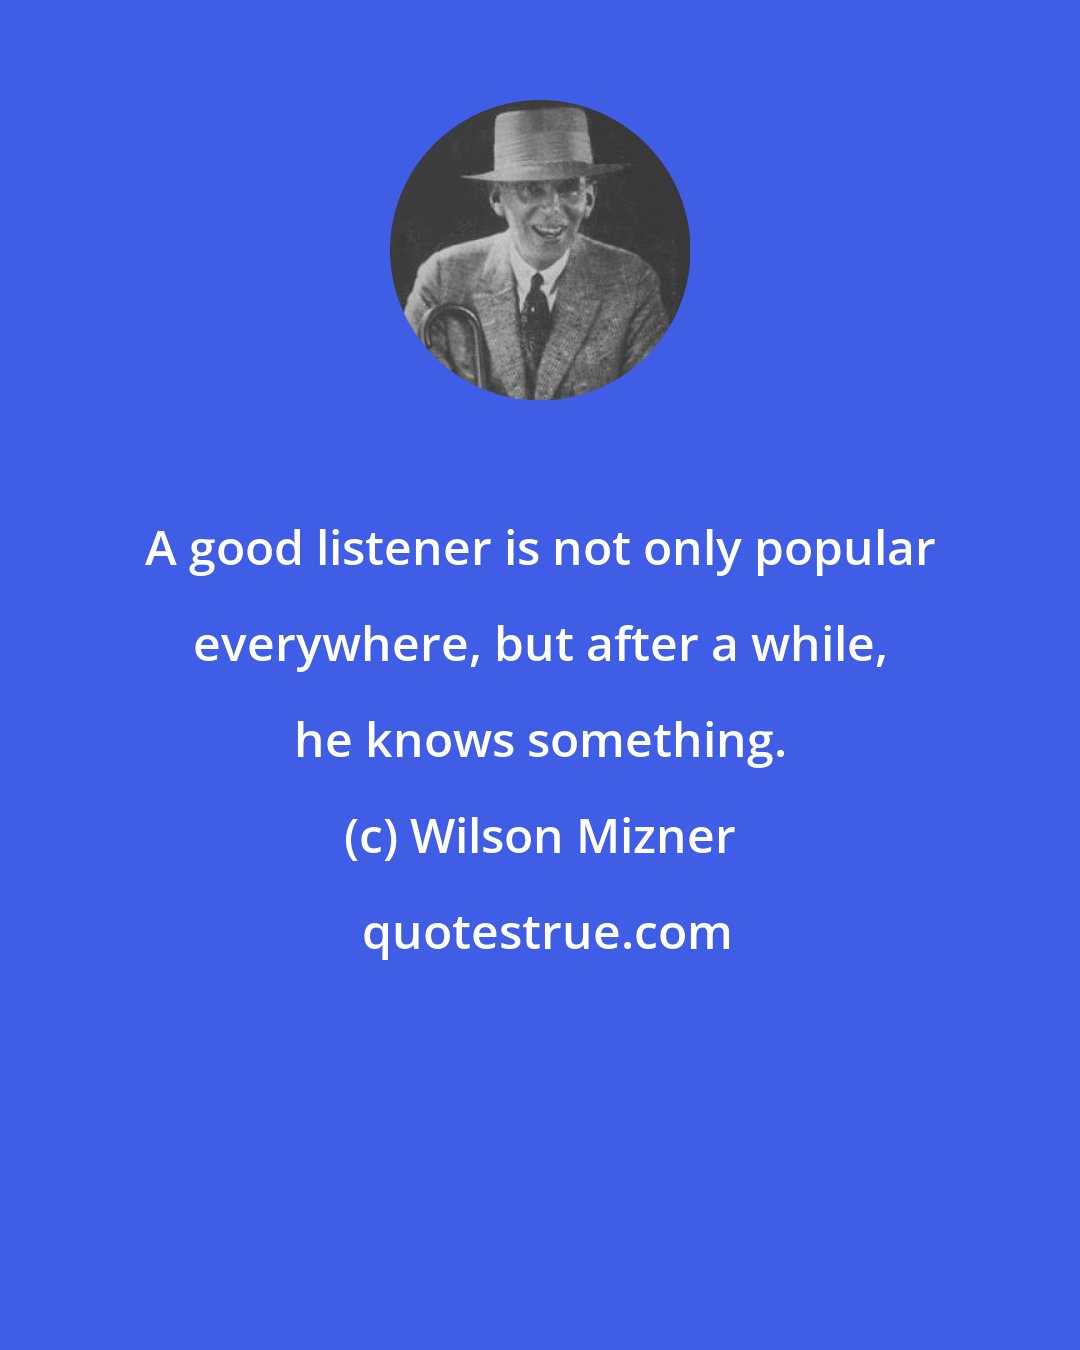 Wilson Mizner: A good listener is not only popular everywhere, but after a while, he knows something.